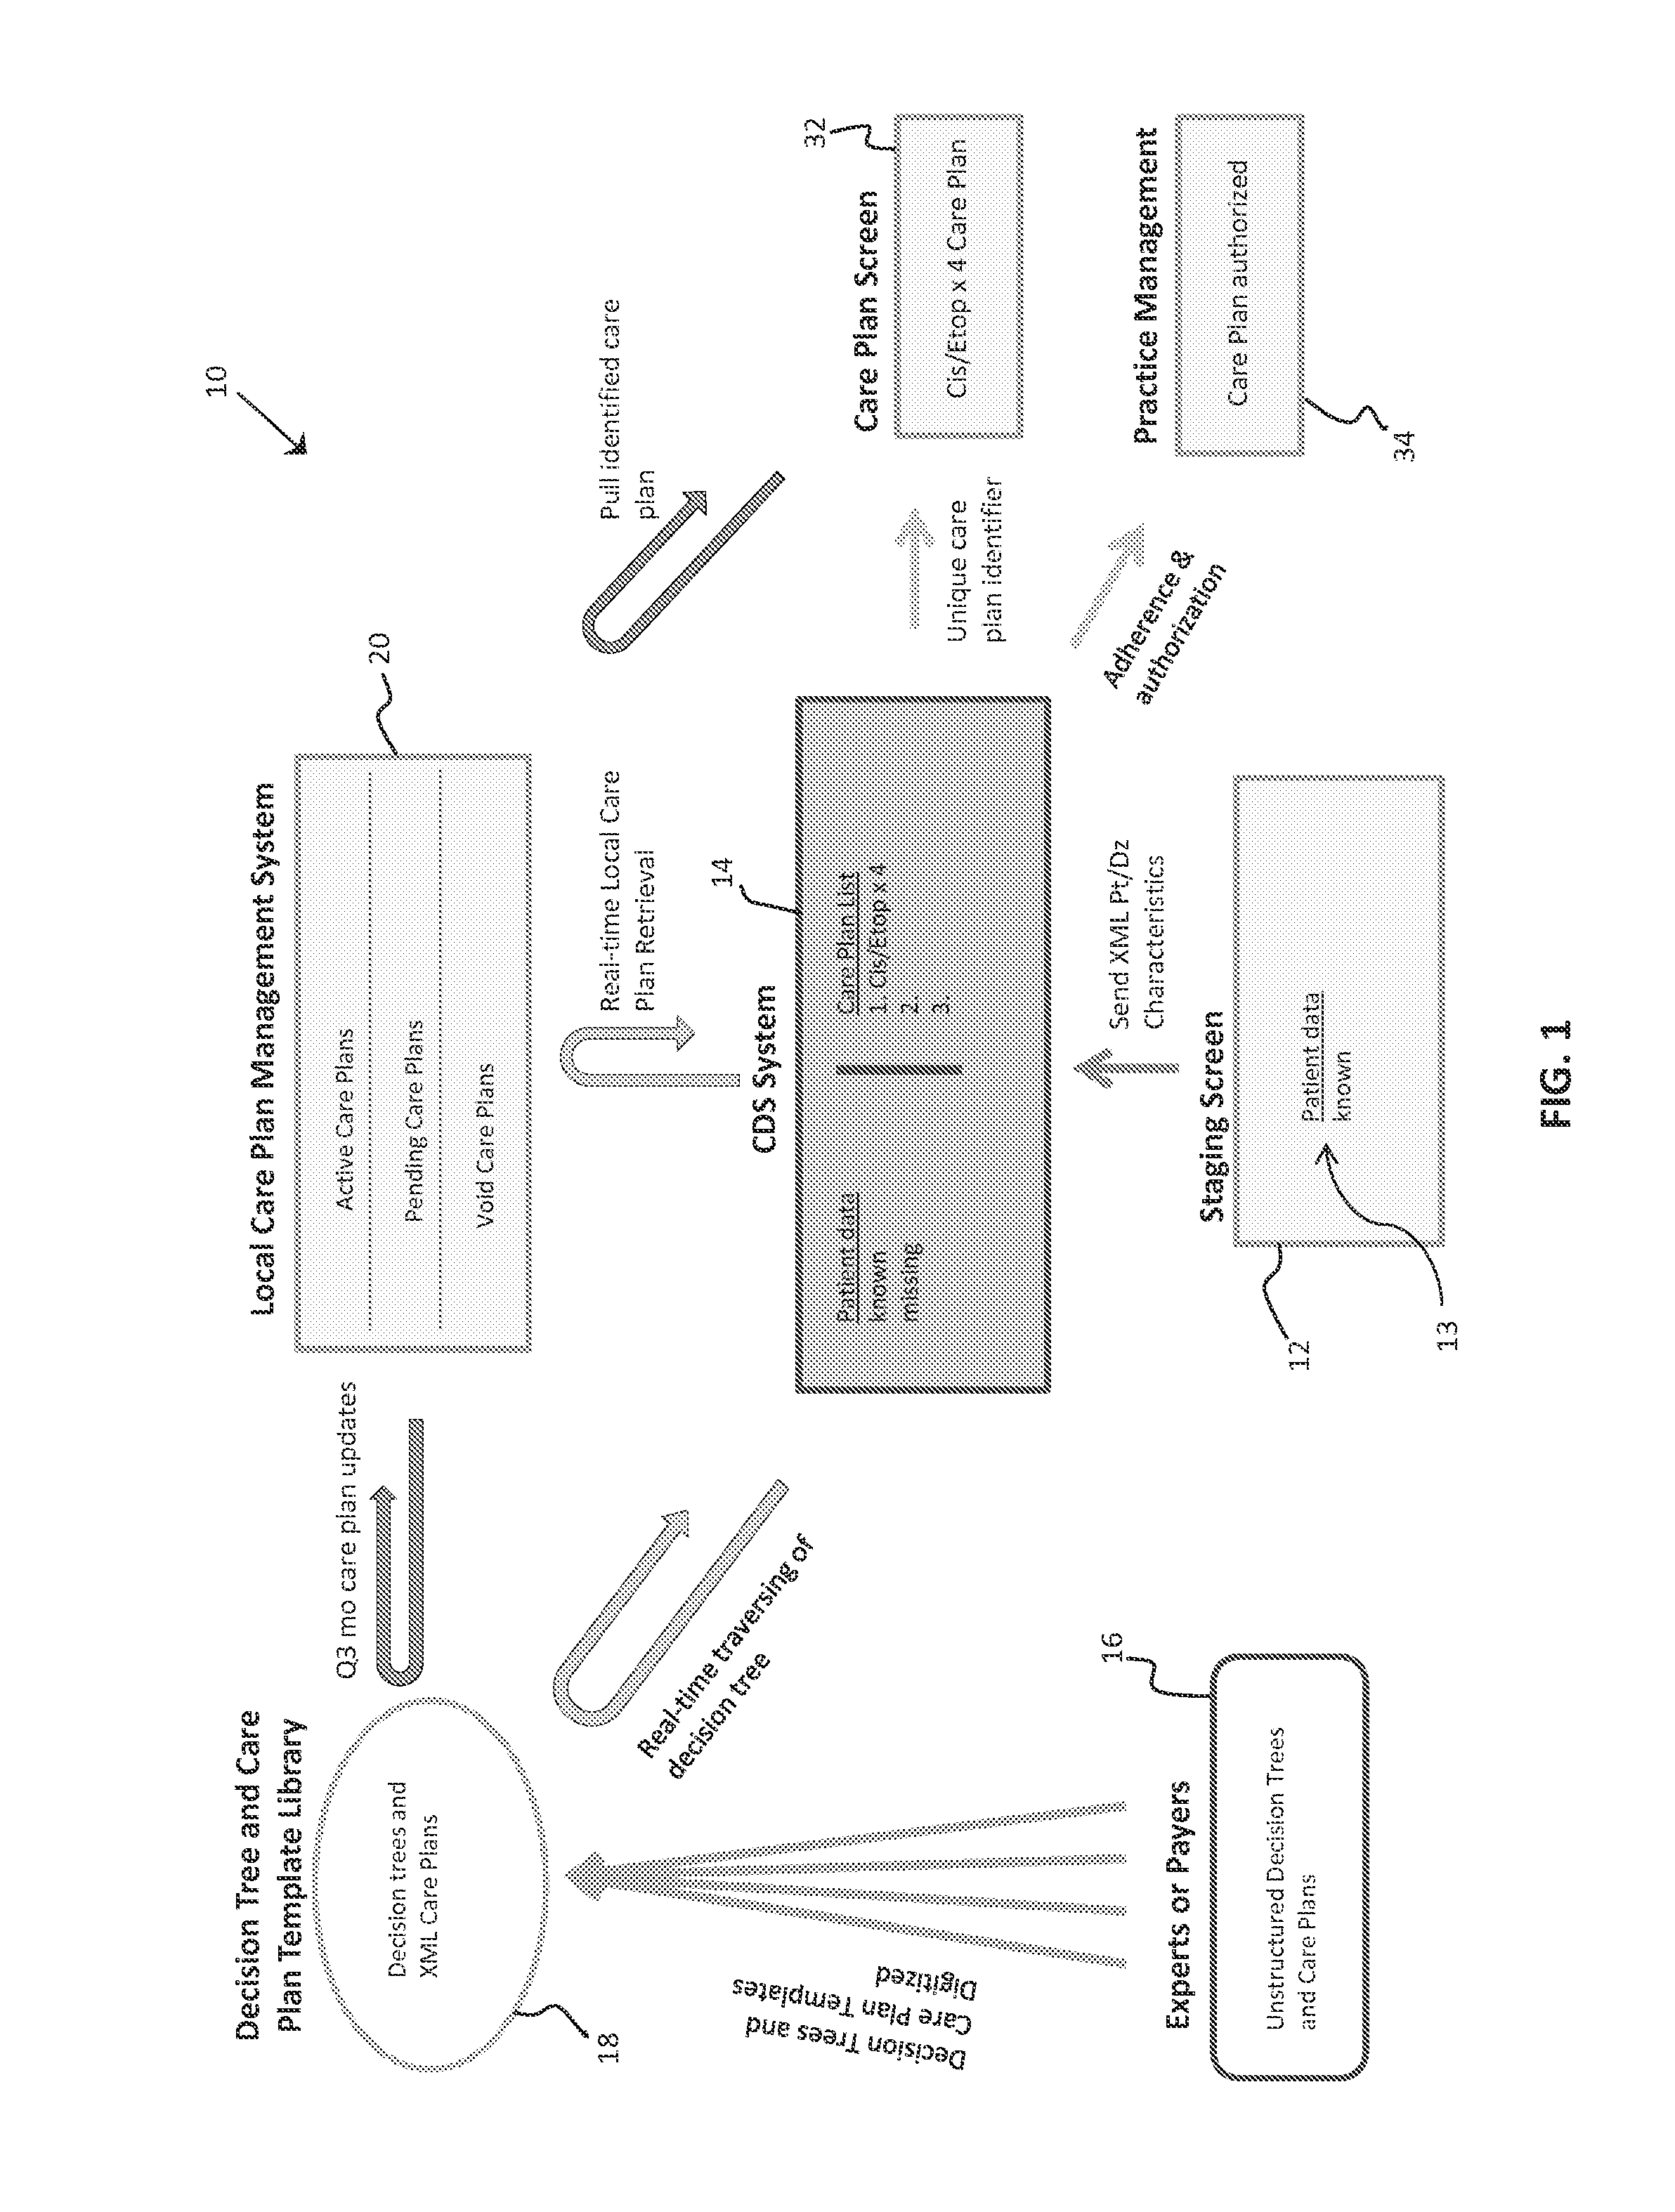 Systems and Methods for Developing and Managing Oncology Treatment Plans